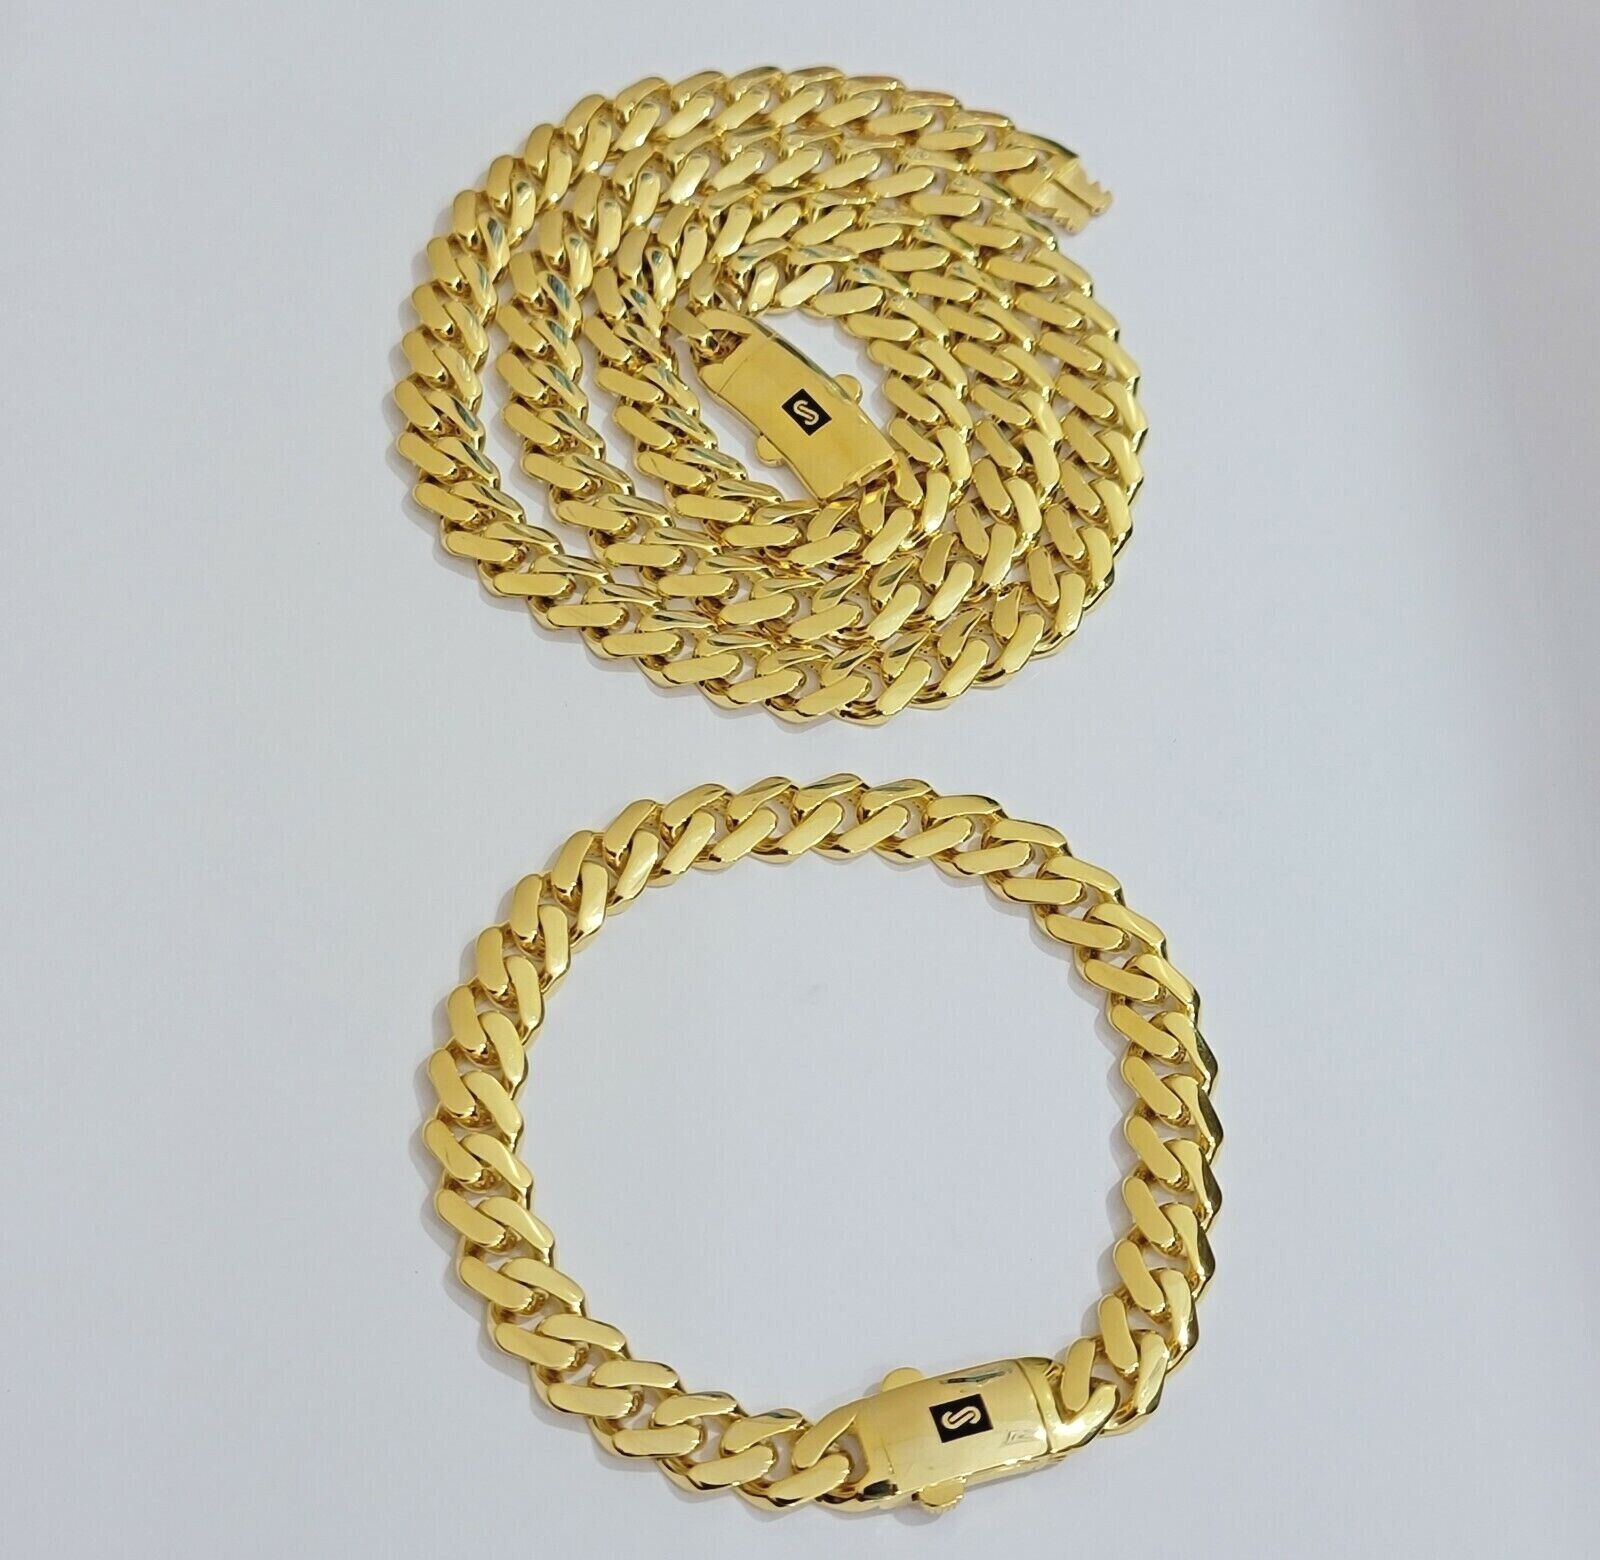 Real 10k Gold Chain Monaco Necklace Cuban Royal Link 8.5 mm 22